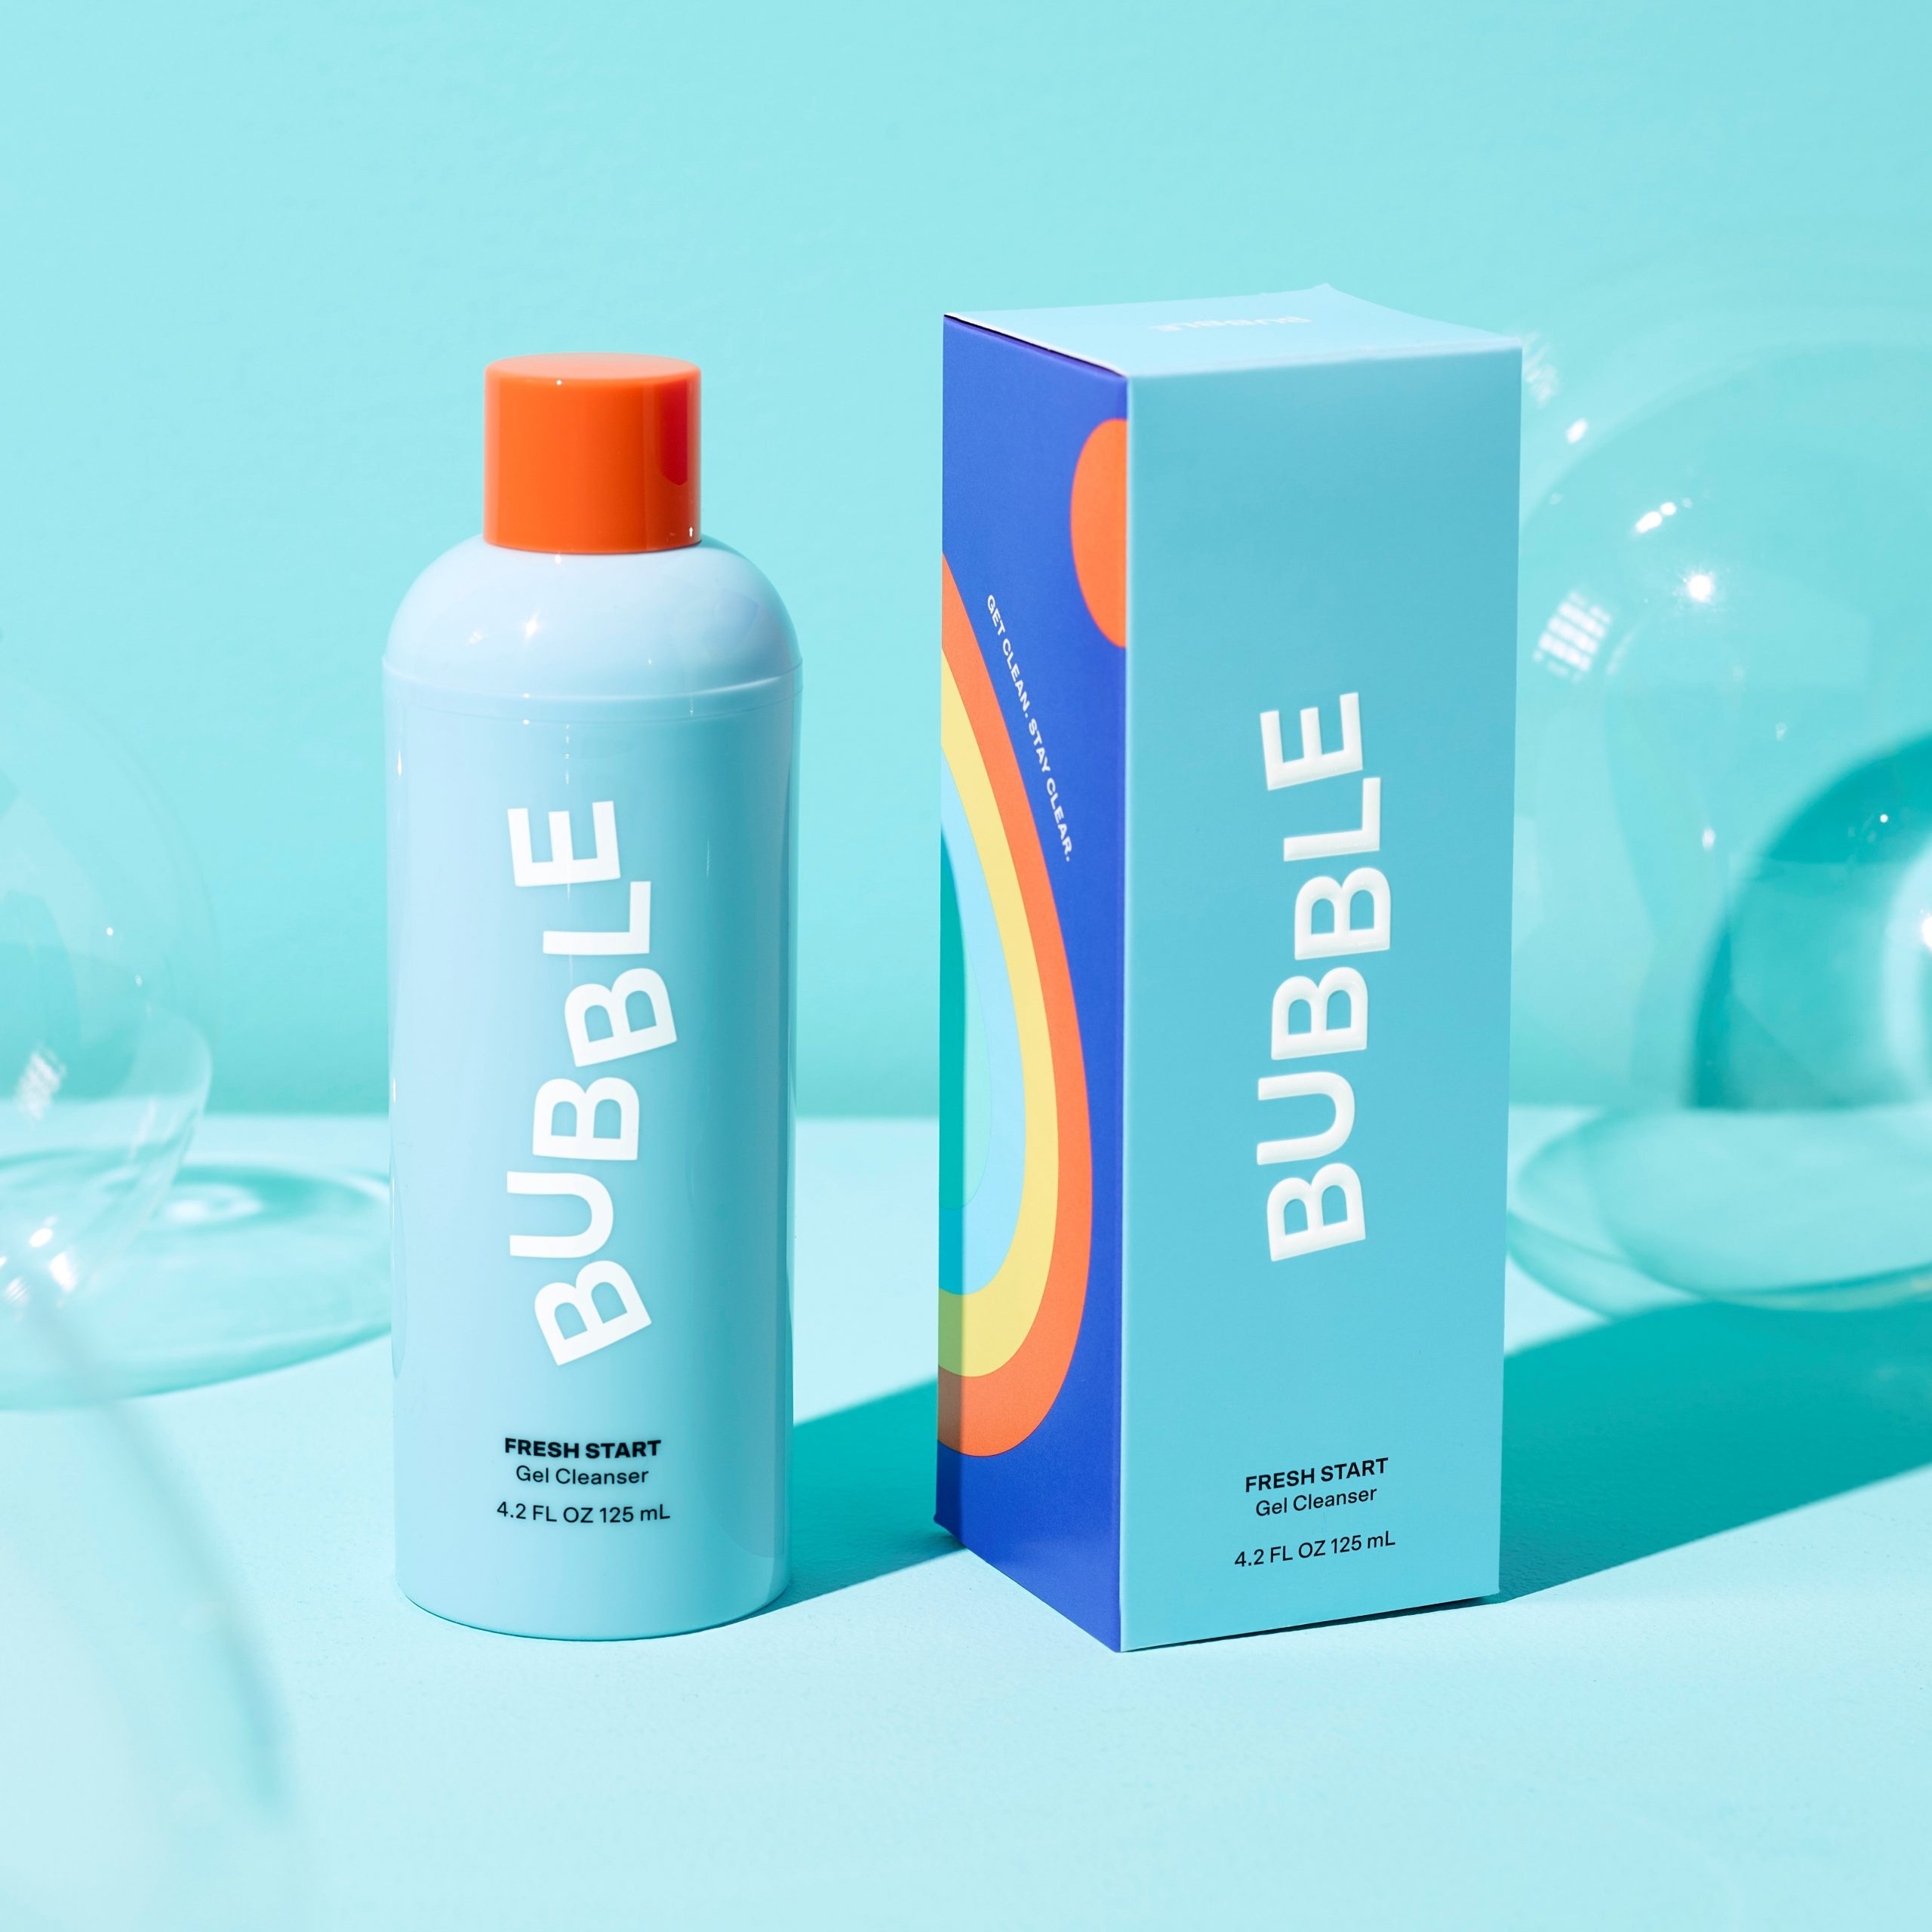 Say hello to healthy skin bubble skin care for teens